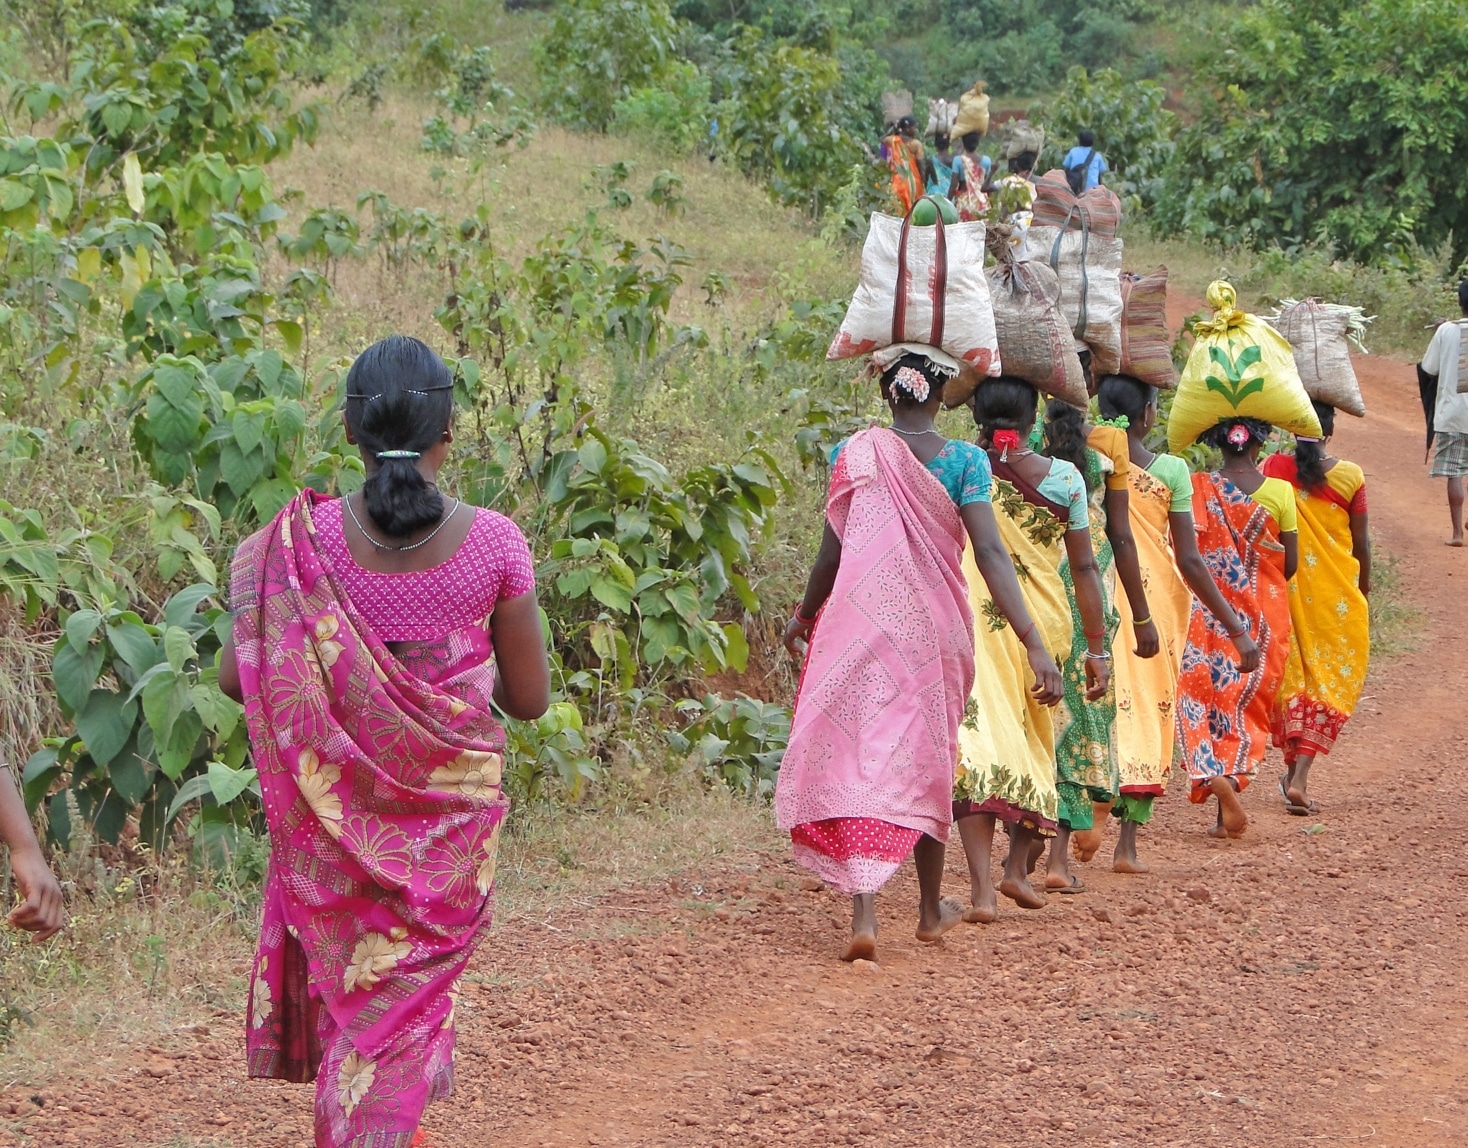 A group of Indian girls dressed in Indiain attire walking down a dirt path with bags of stuff balanced on their heads